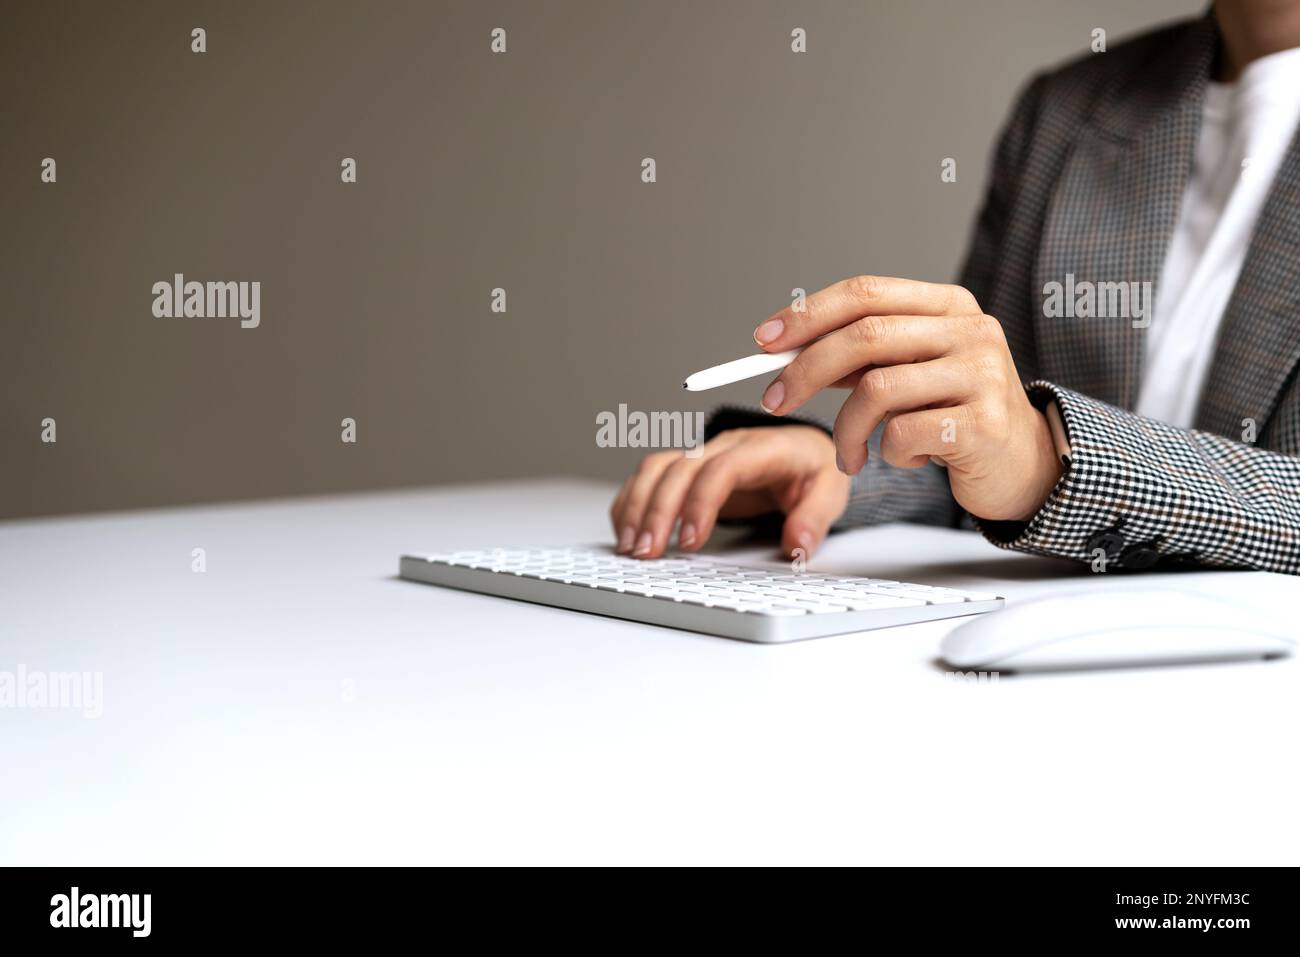 Female business person holding digital pen in hand signing virtual contract. Stock Photo